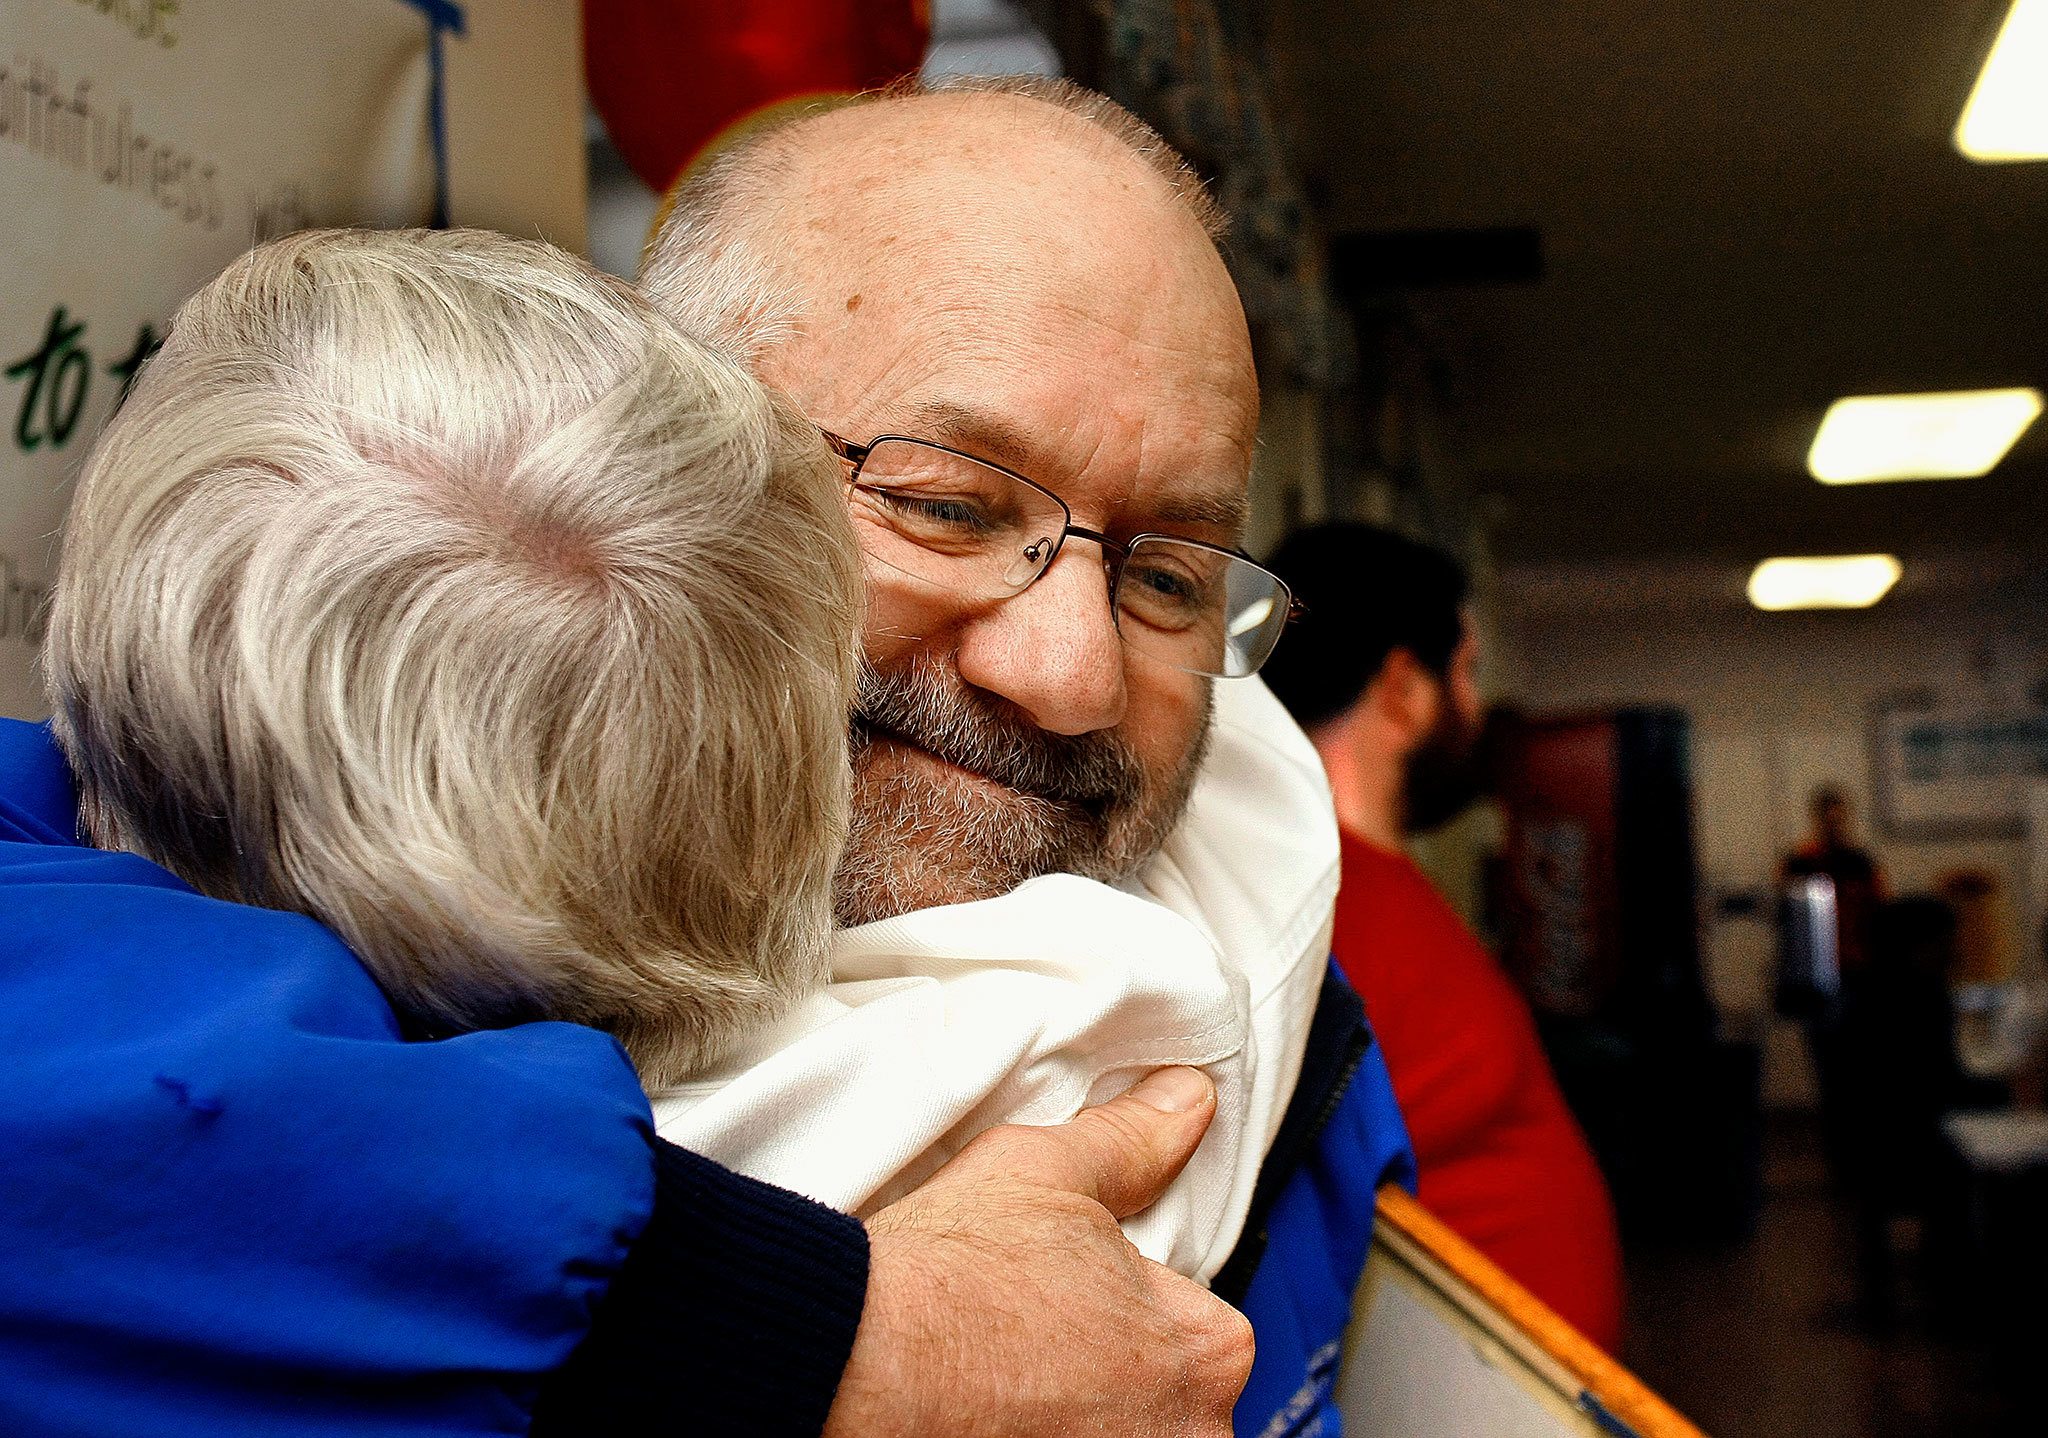 Frank Fargo, who offers free showers out of his trailer, is among 2016 KSER Voice of the Community Award winners. He is shown here in 2012 getting a hug from Lois Sugars at Everett’s First Presbyterian Church, where he provides showers during a weekly dinner for people who are homeless. (Sarah Weiser / The Herald)